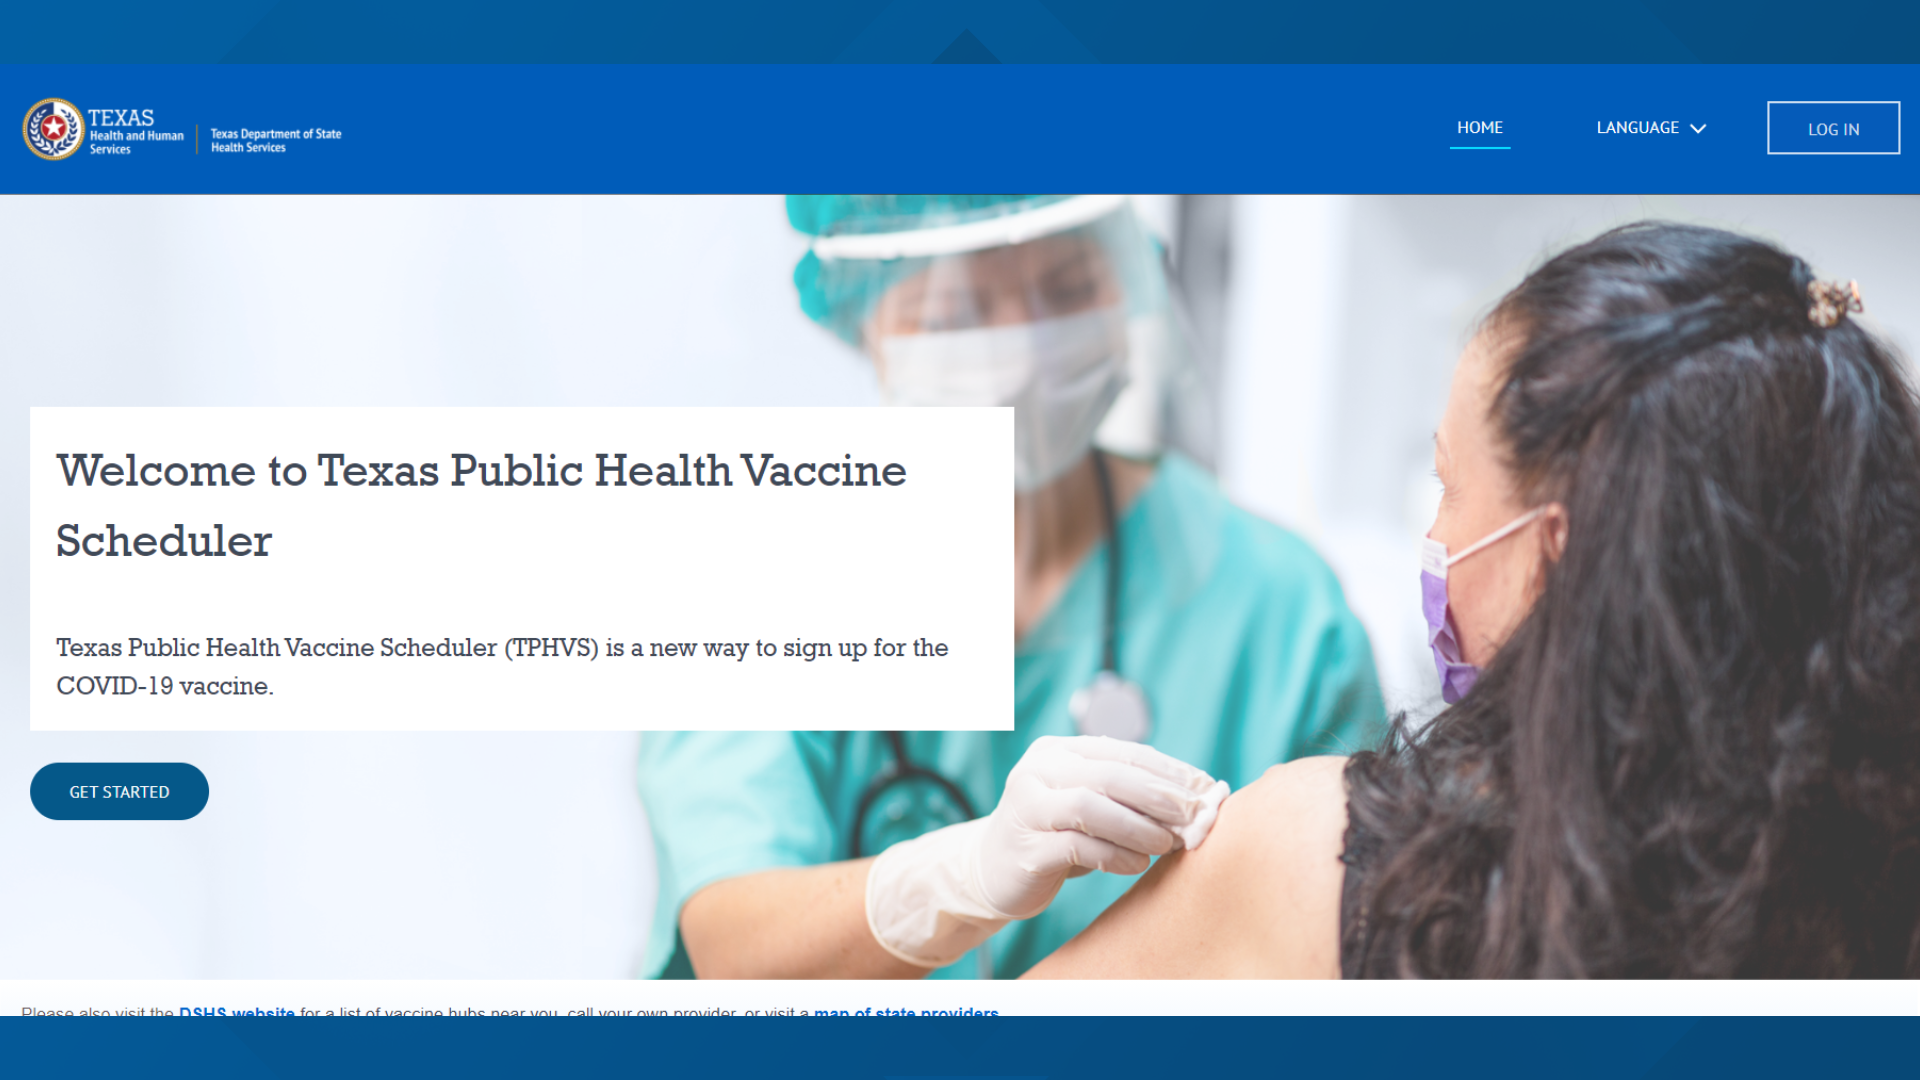 A state website can provide more options for people seeking vaccine after the Johnson & Johnson supply was reduced to some providers.